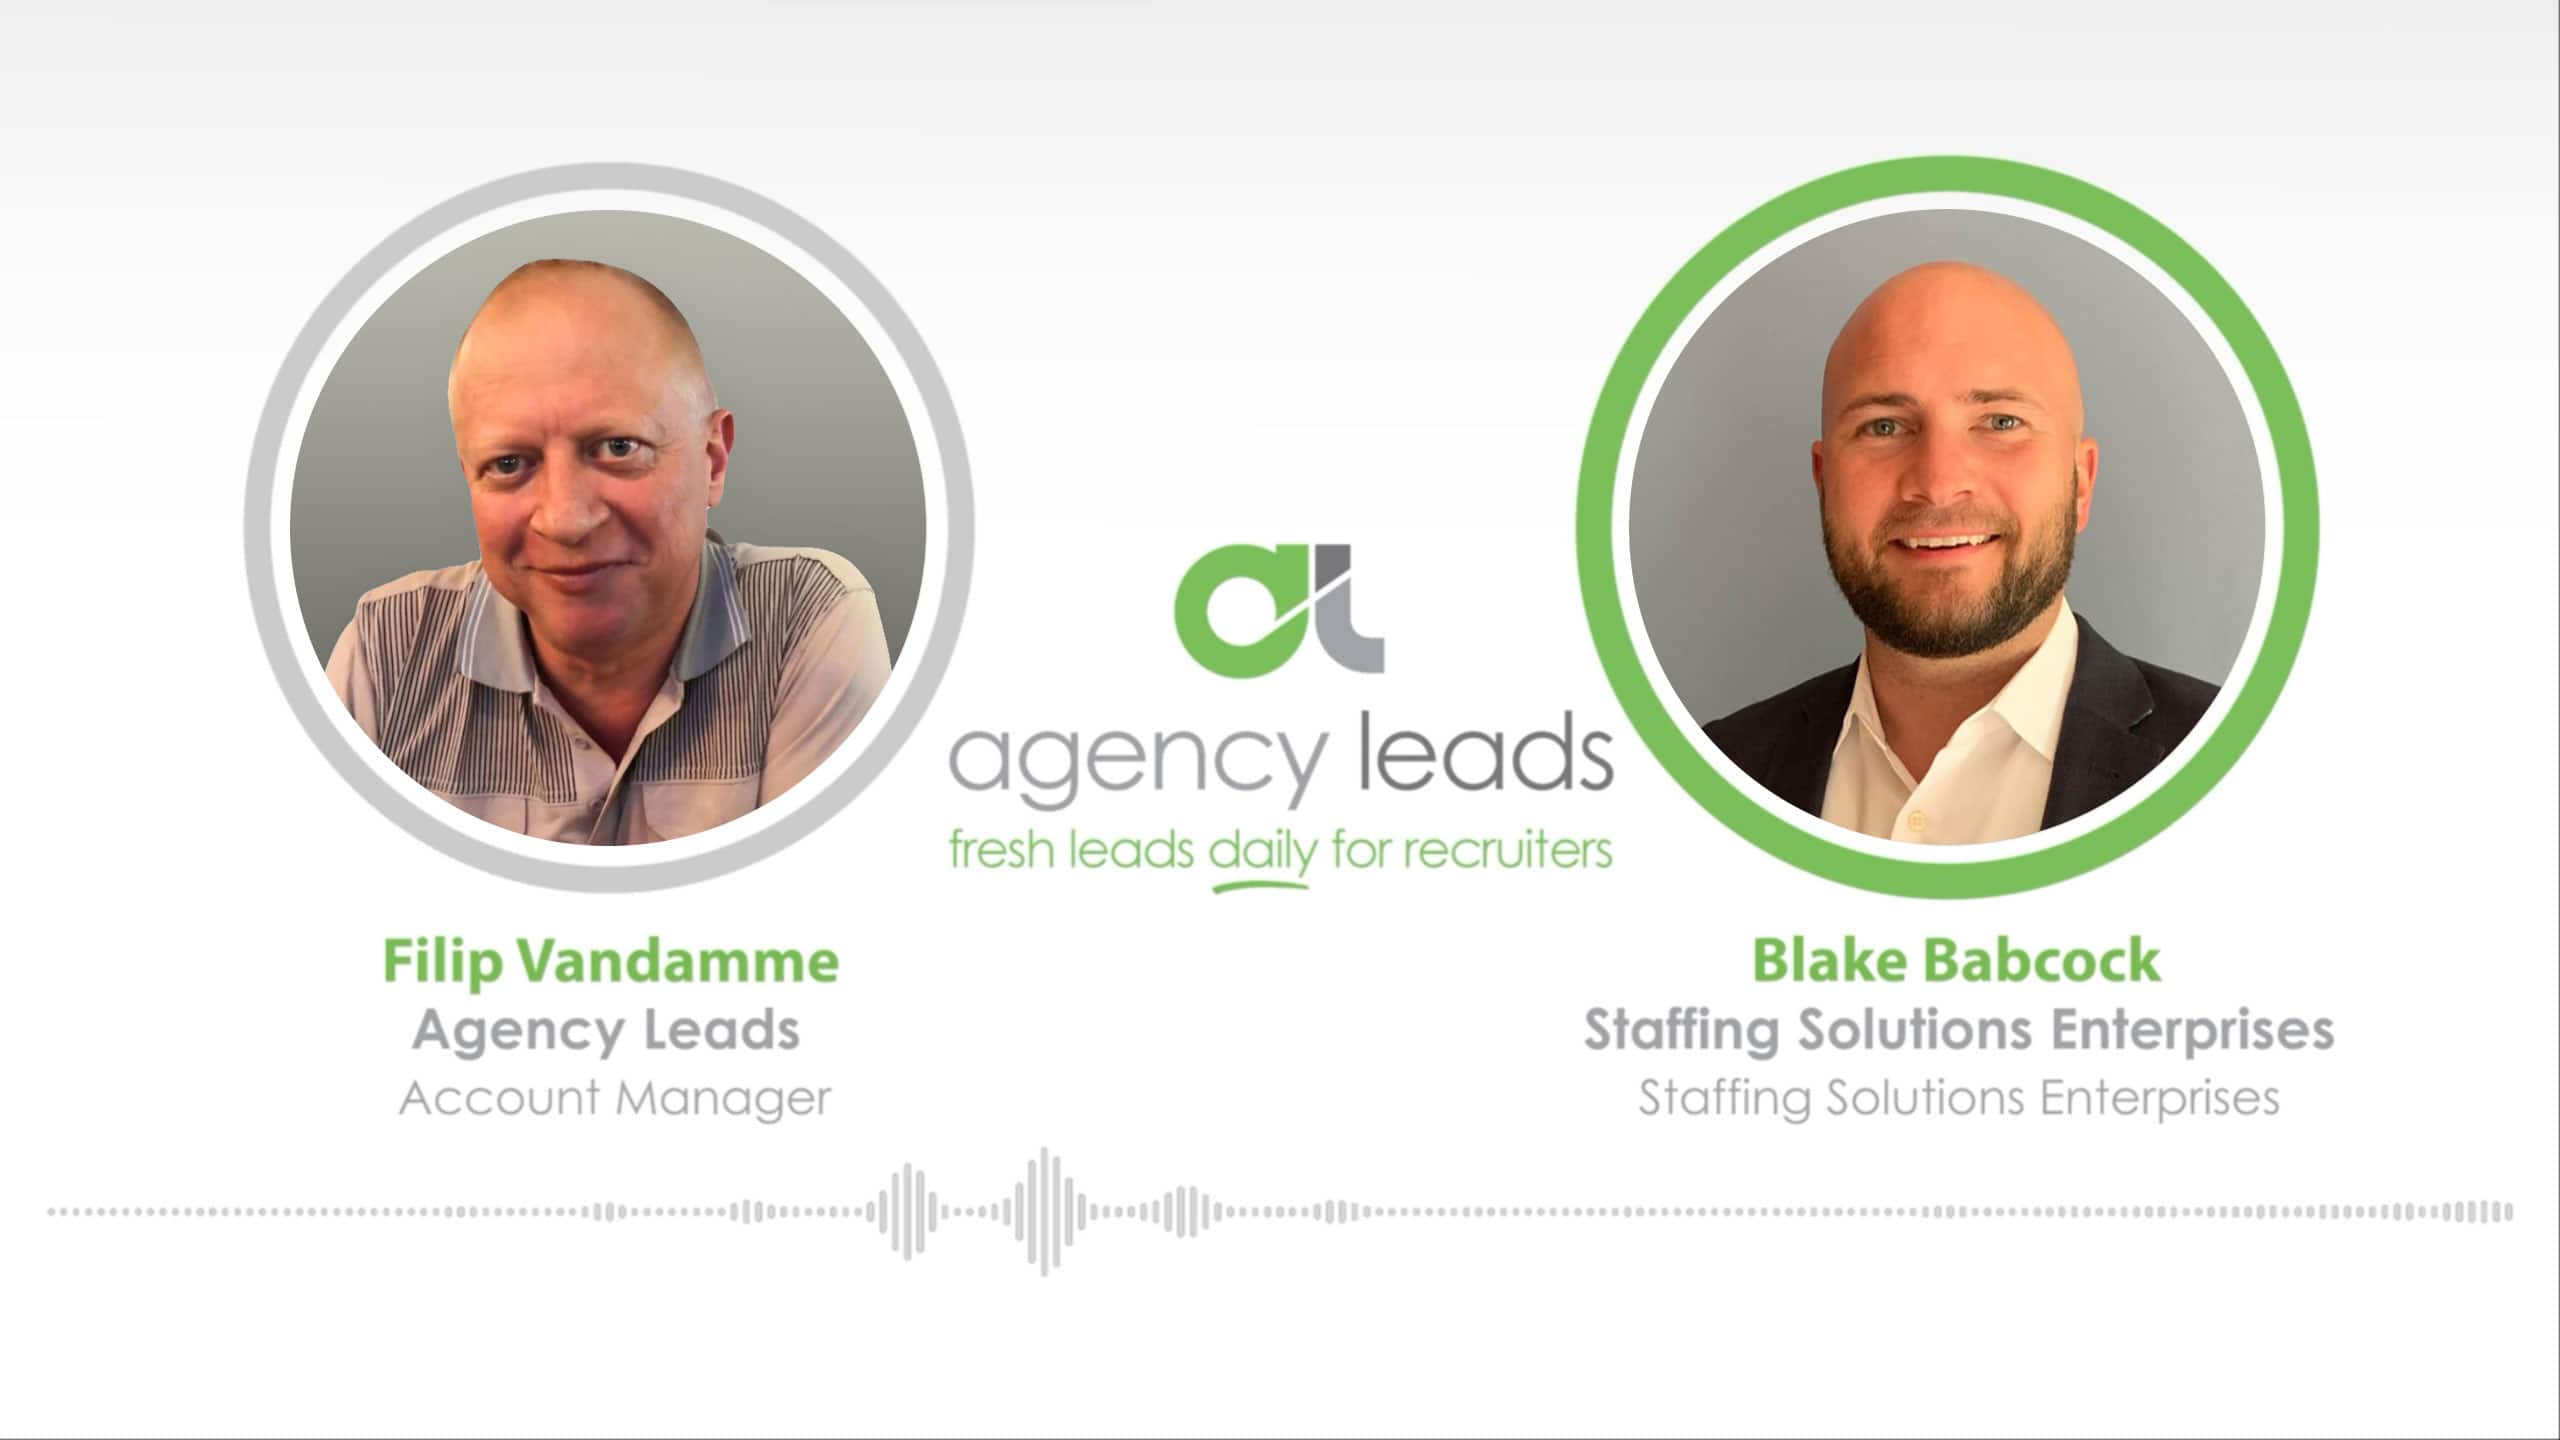 Case Study with Blake Babcock from Staffing Solutions Enterprises